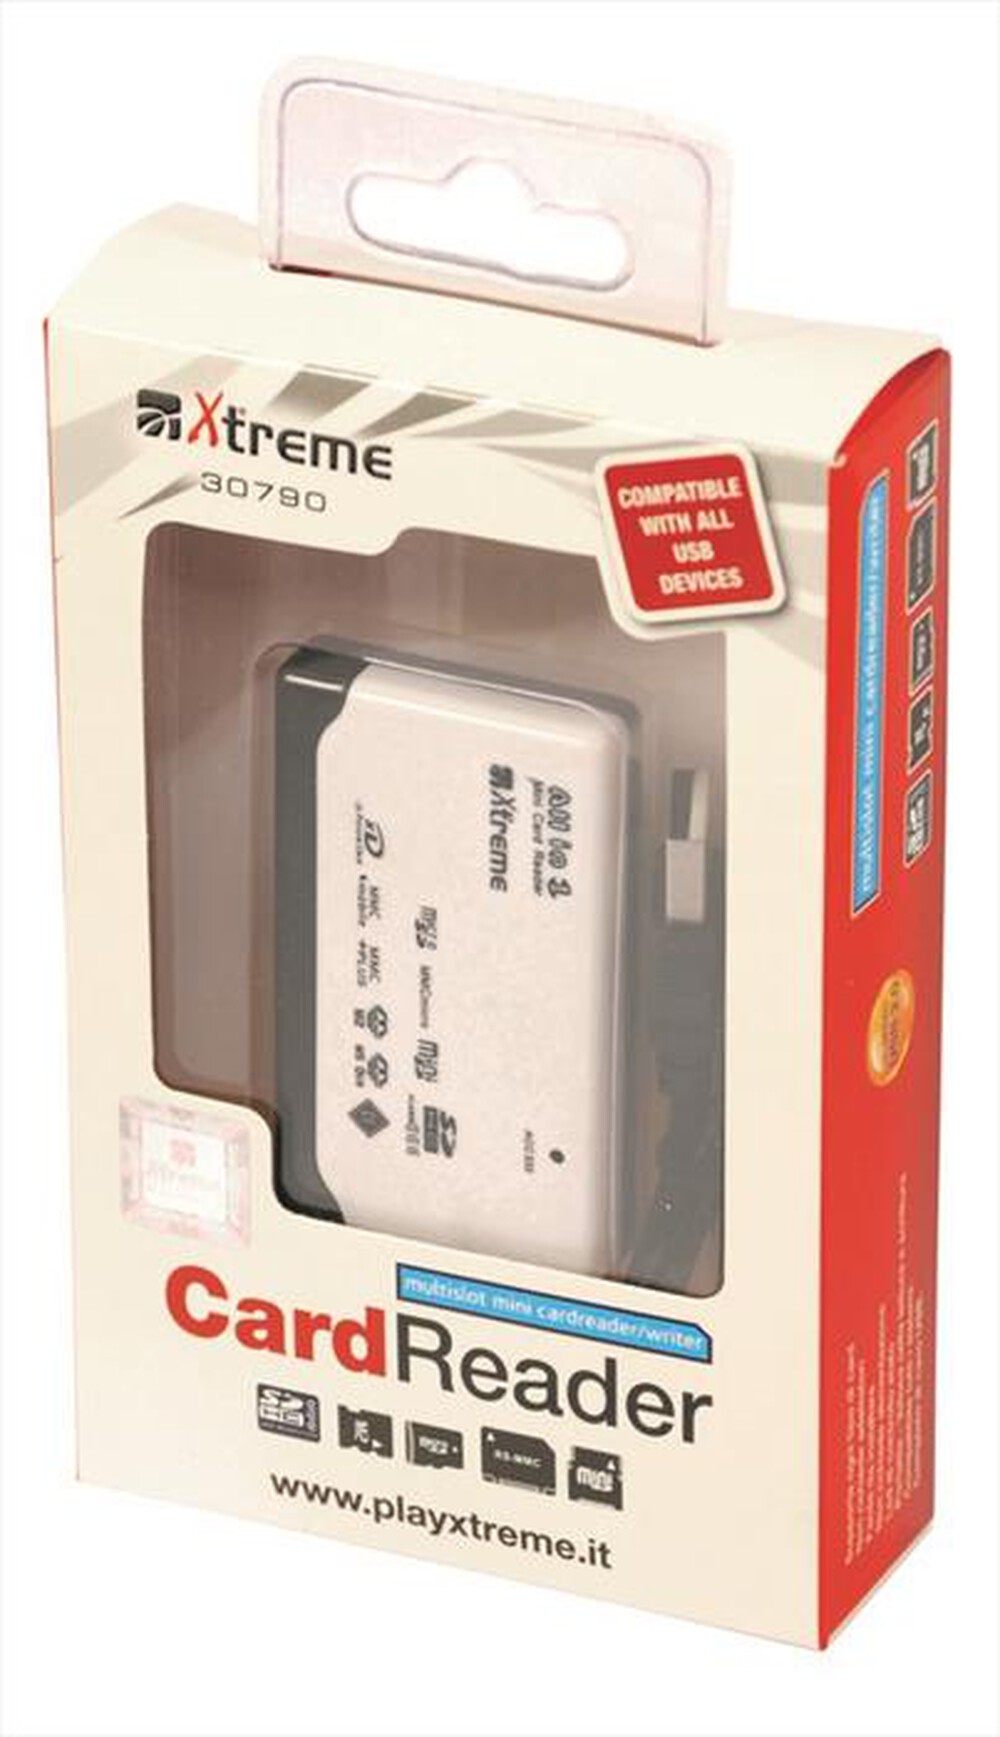 "XTREME - 30790 - All in 1 Mini Card Reader USB 2.0 - "